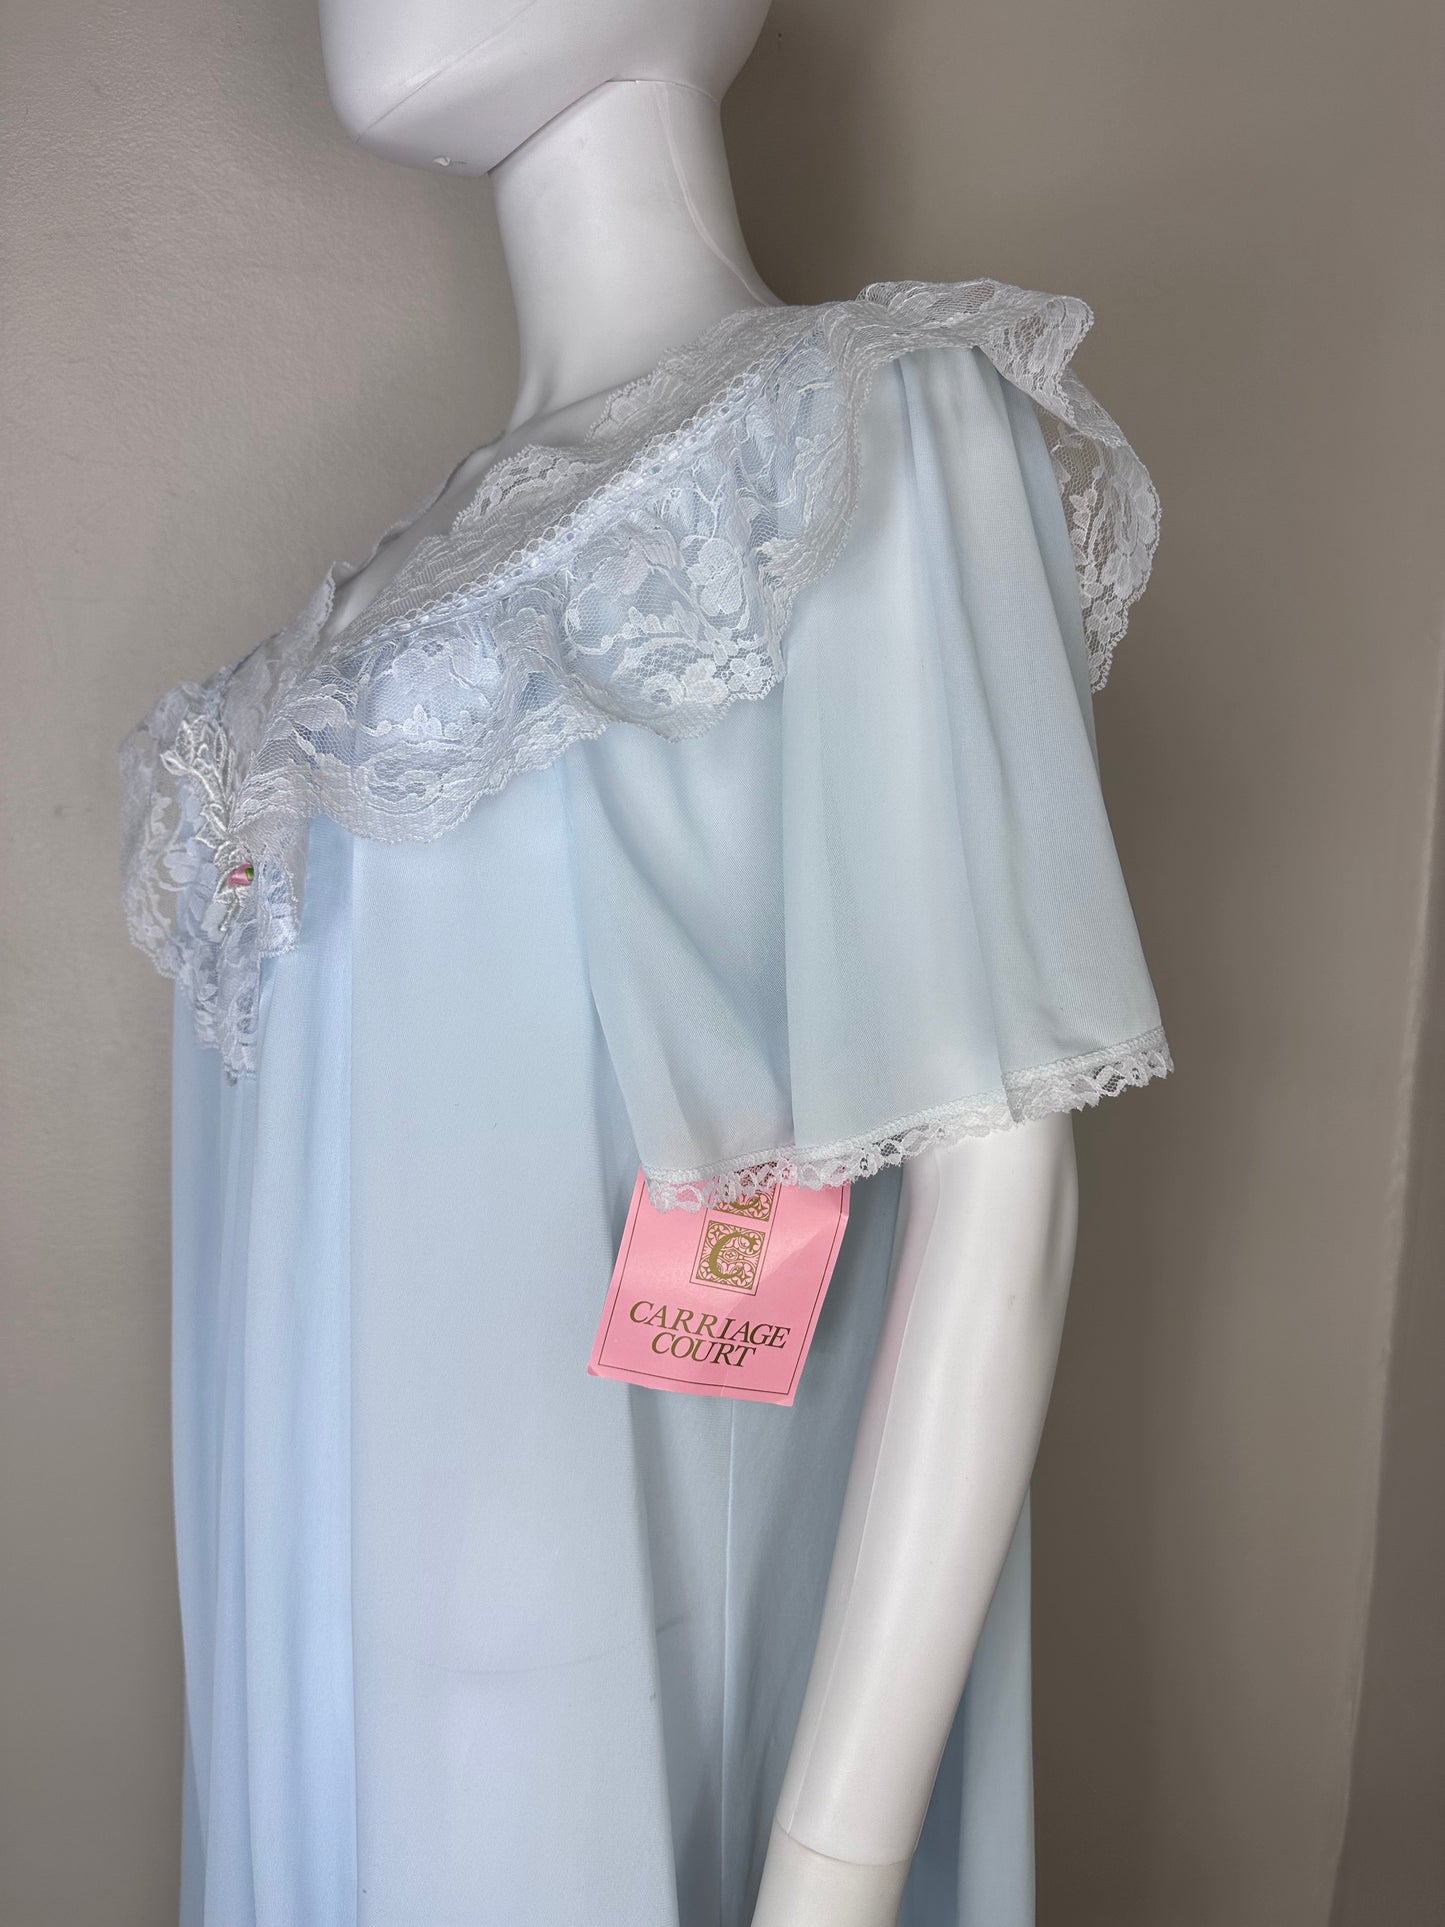 1980s/90s Pastel Blue Nightgown, Carriage Court Sears Size L/XL, Deadstock with tags